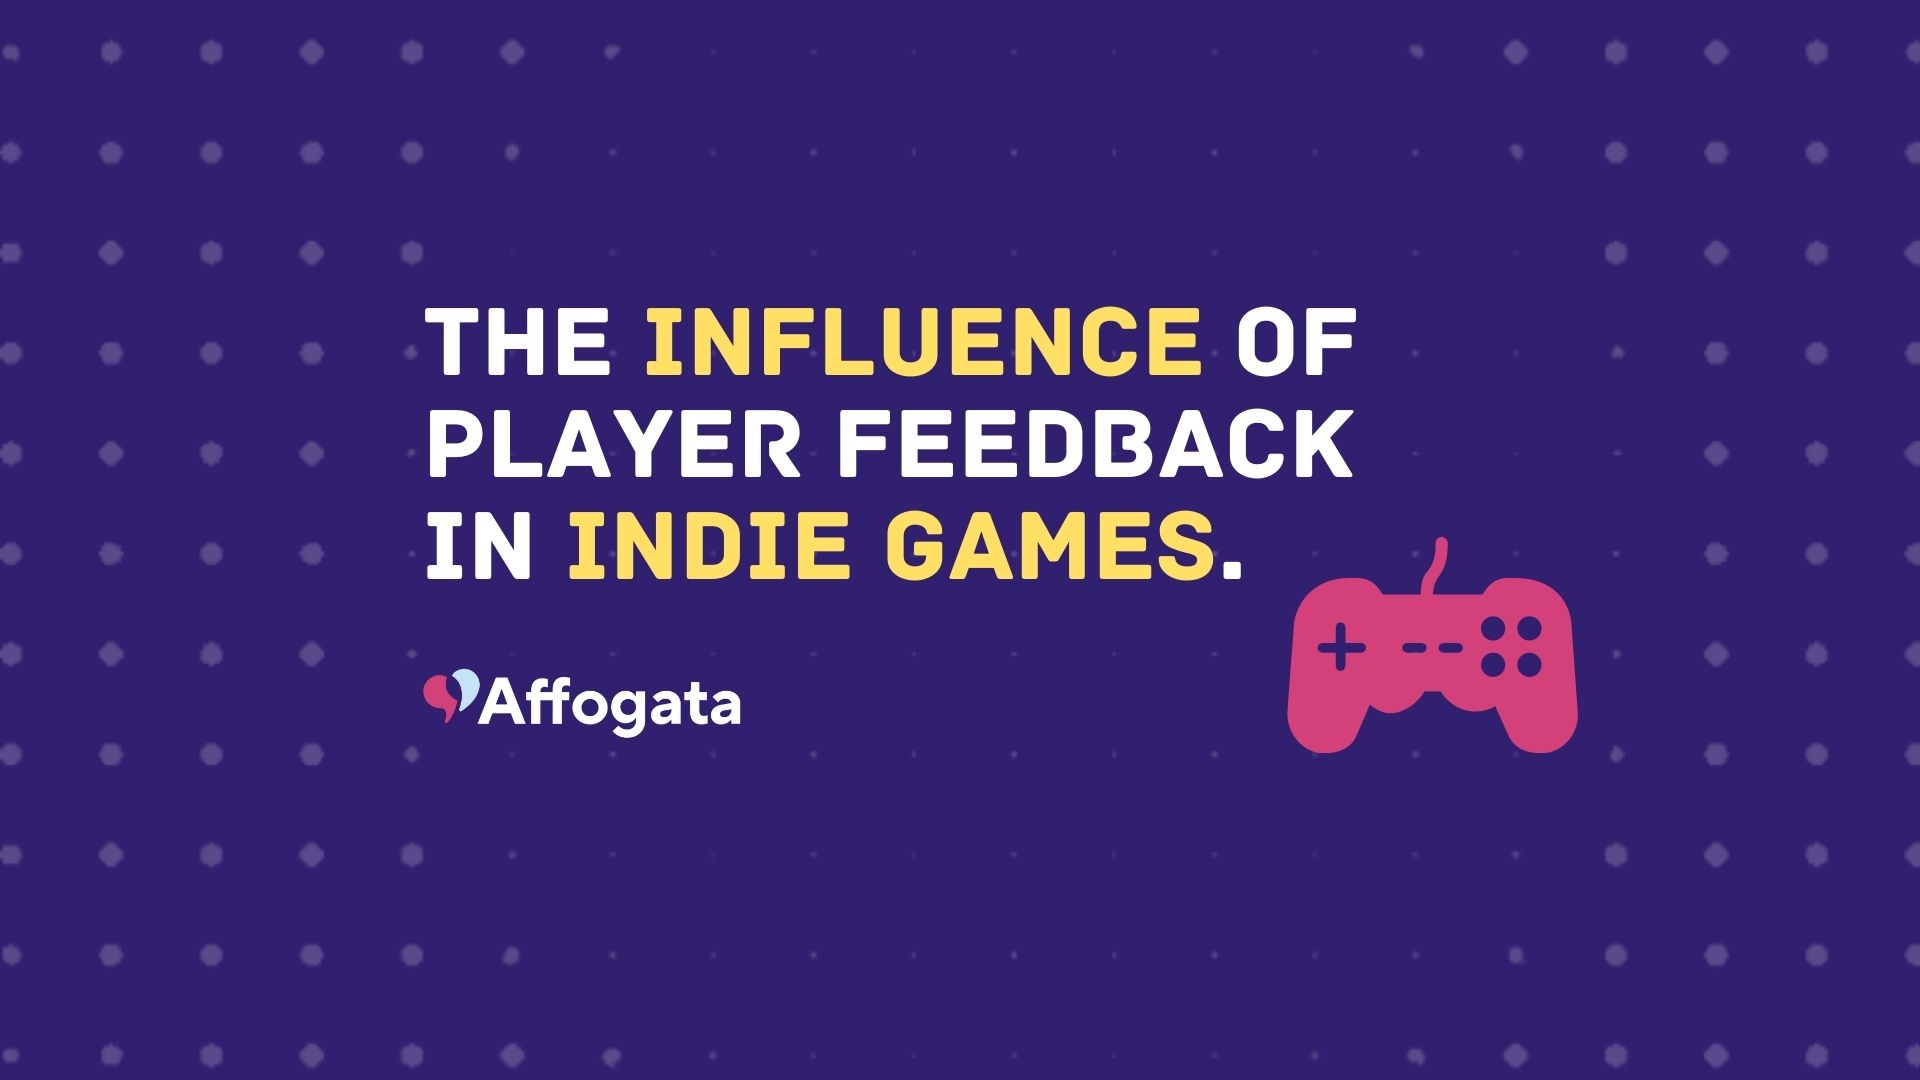 The influence of player feedback in Indie games